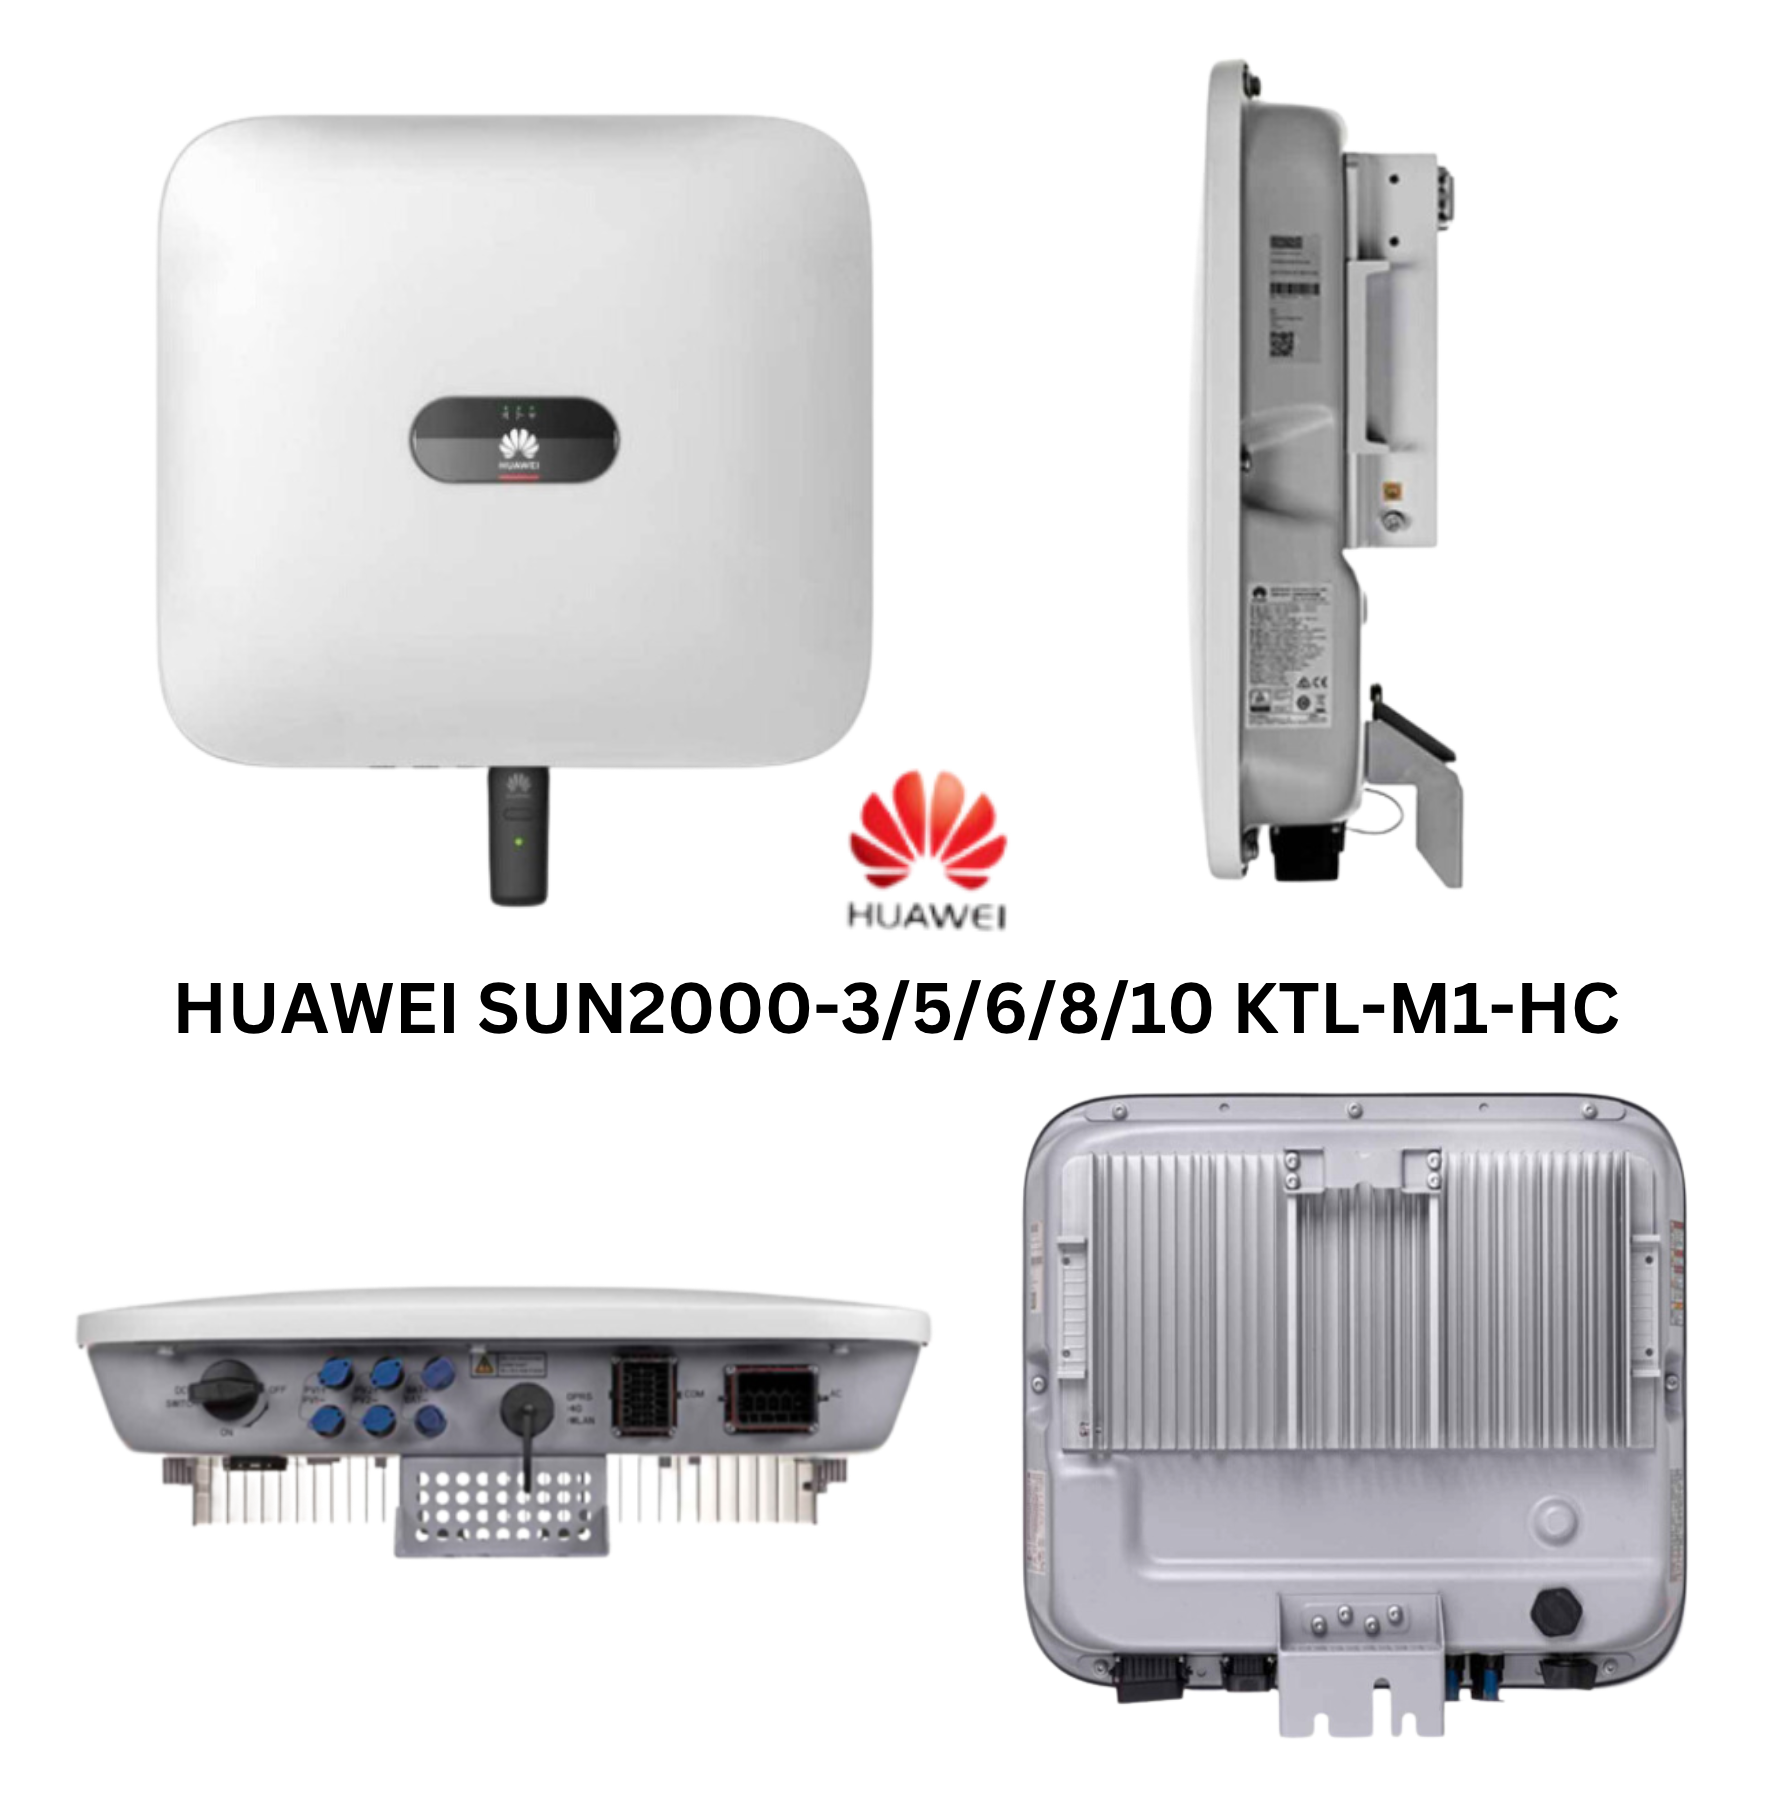 Huawei Ensemble Photovoltaïque Complet - [6kW + 5kWh]